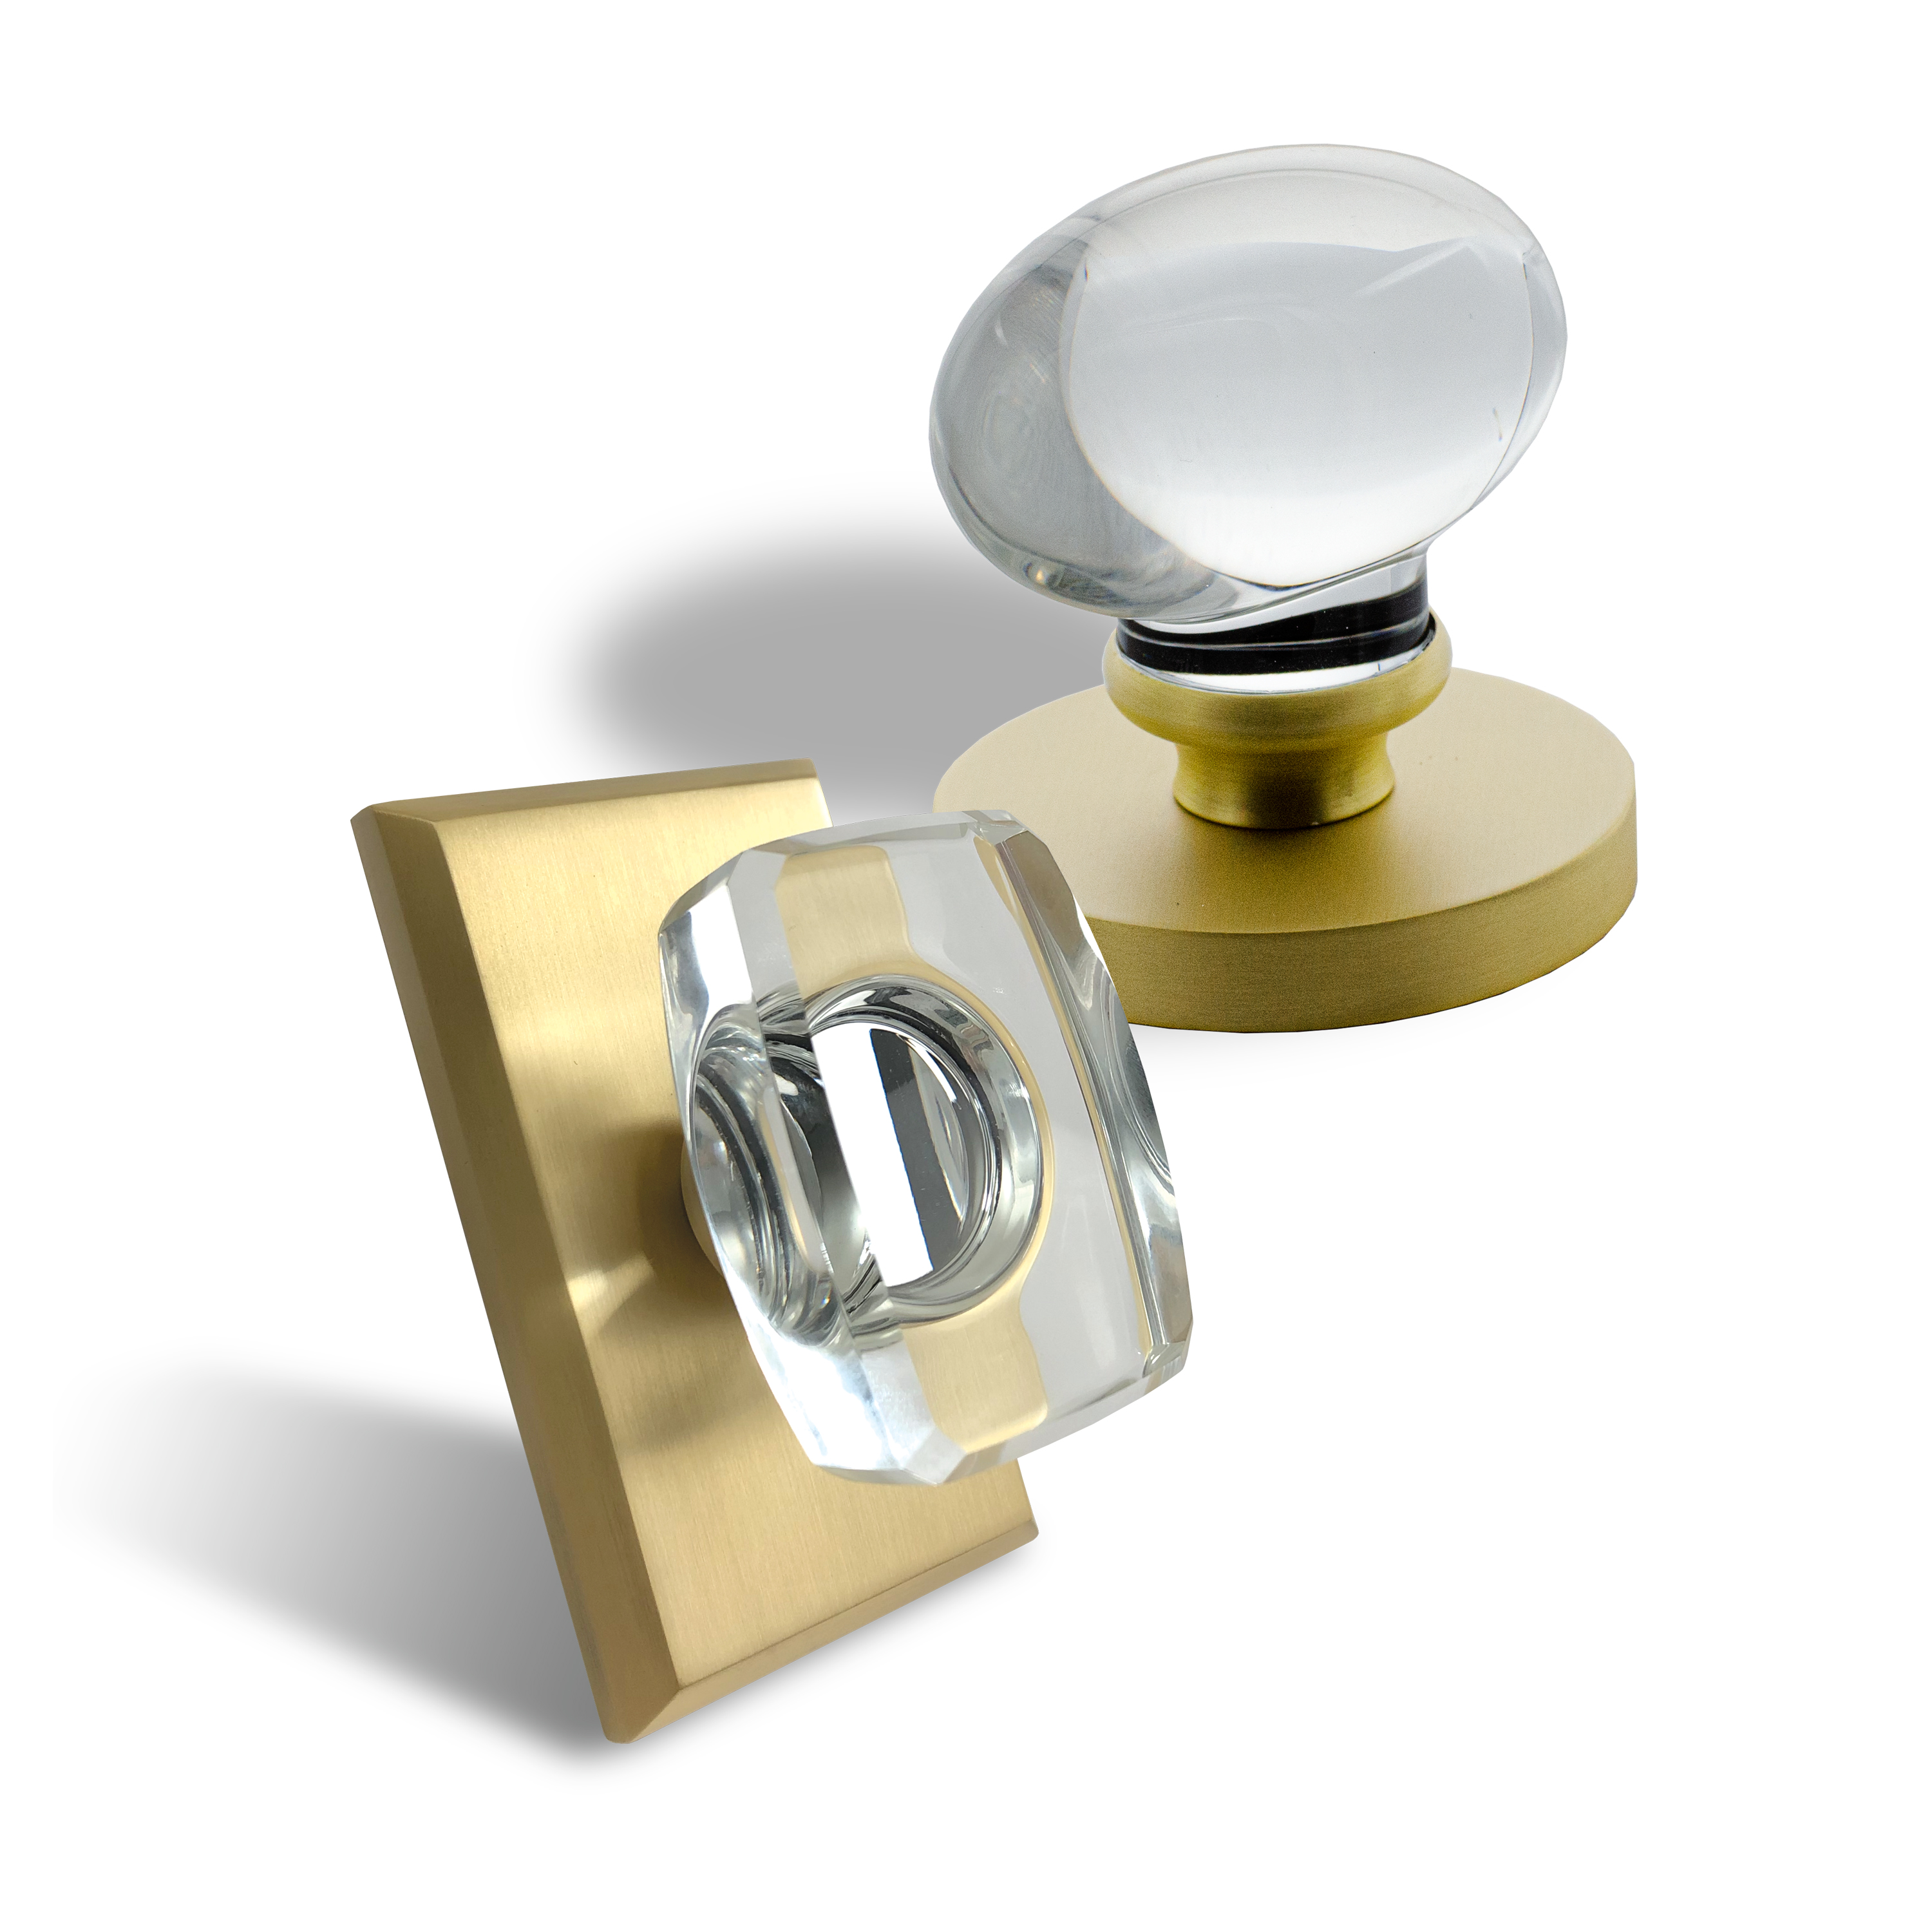 Delaney Hardware’s premium Bravura portfolio adds two striking, new crystal knobs -- rectangular and egg-shaped – to the brand’s elegant solid forged brass selection.